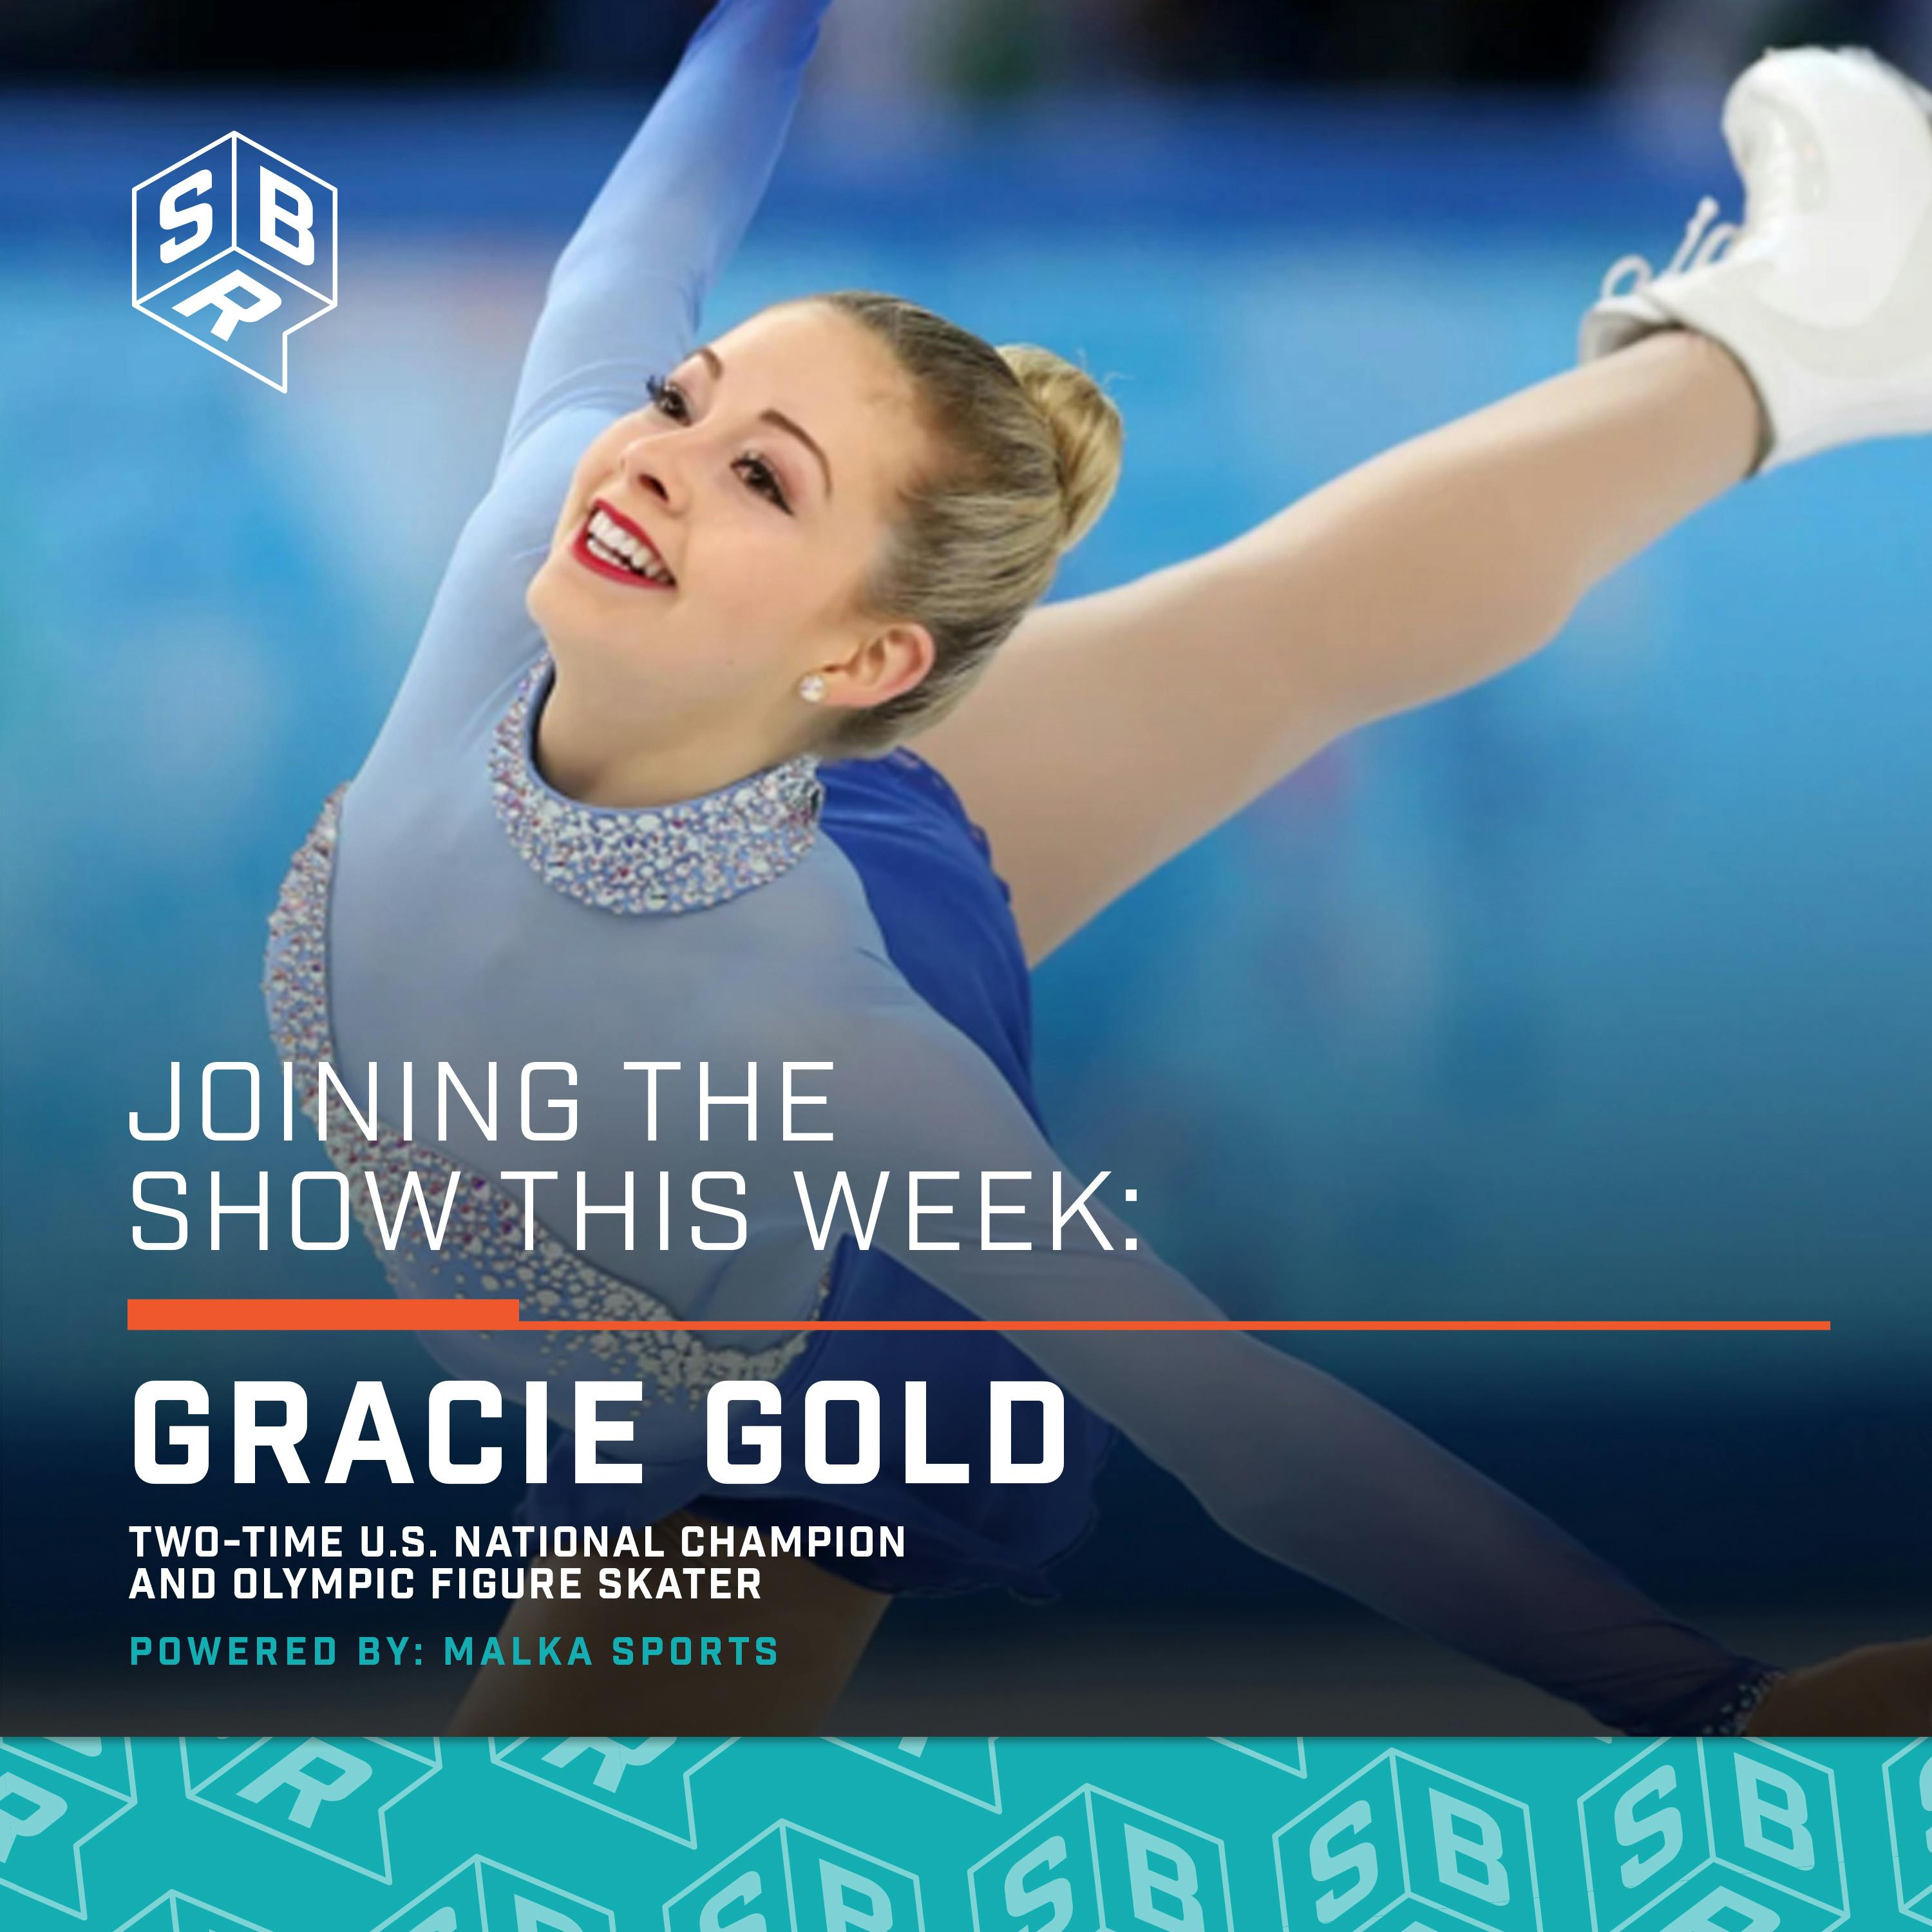 Gracie Gold, Two-time U.S. National Champion & Olympic Figure Skater